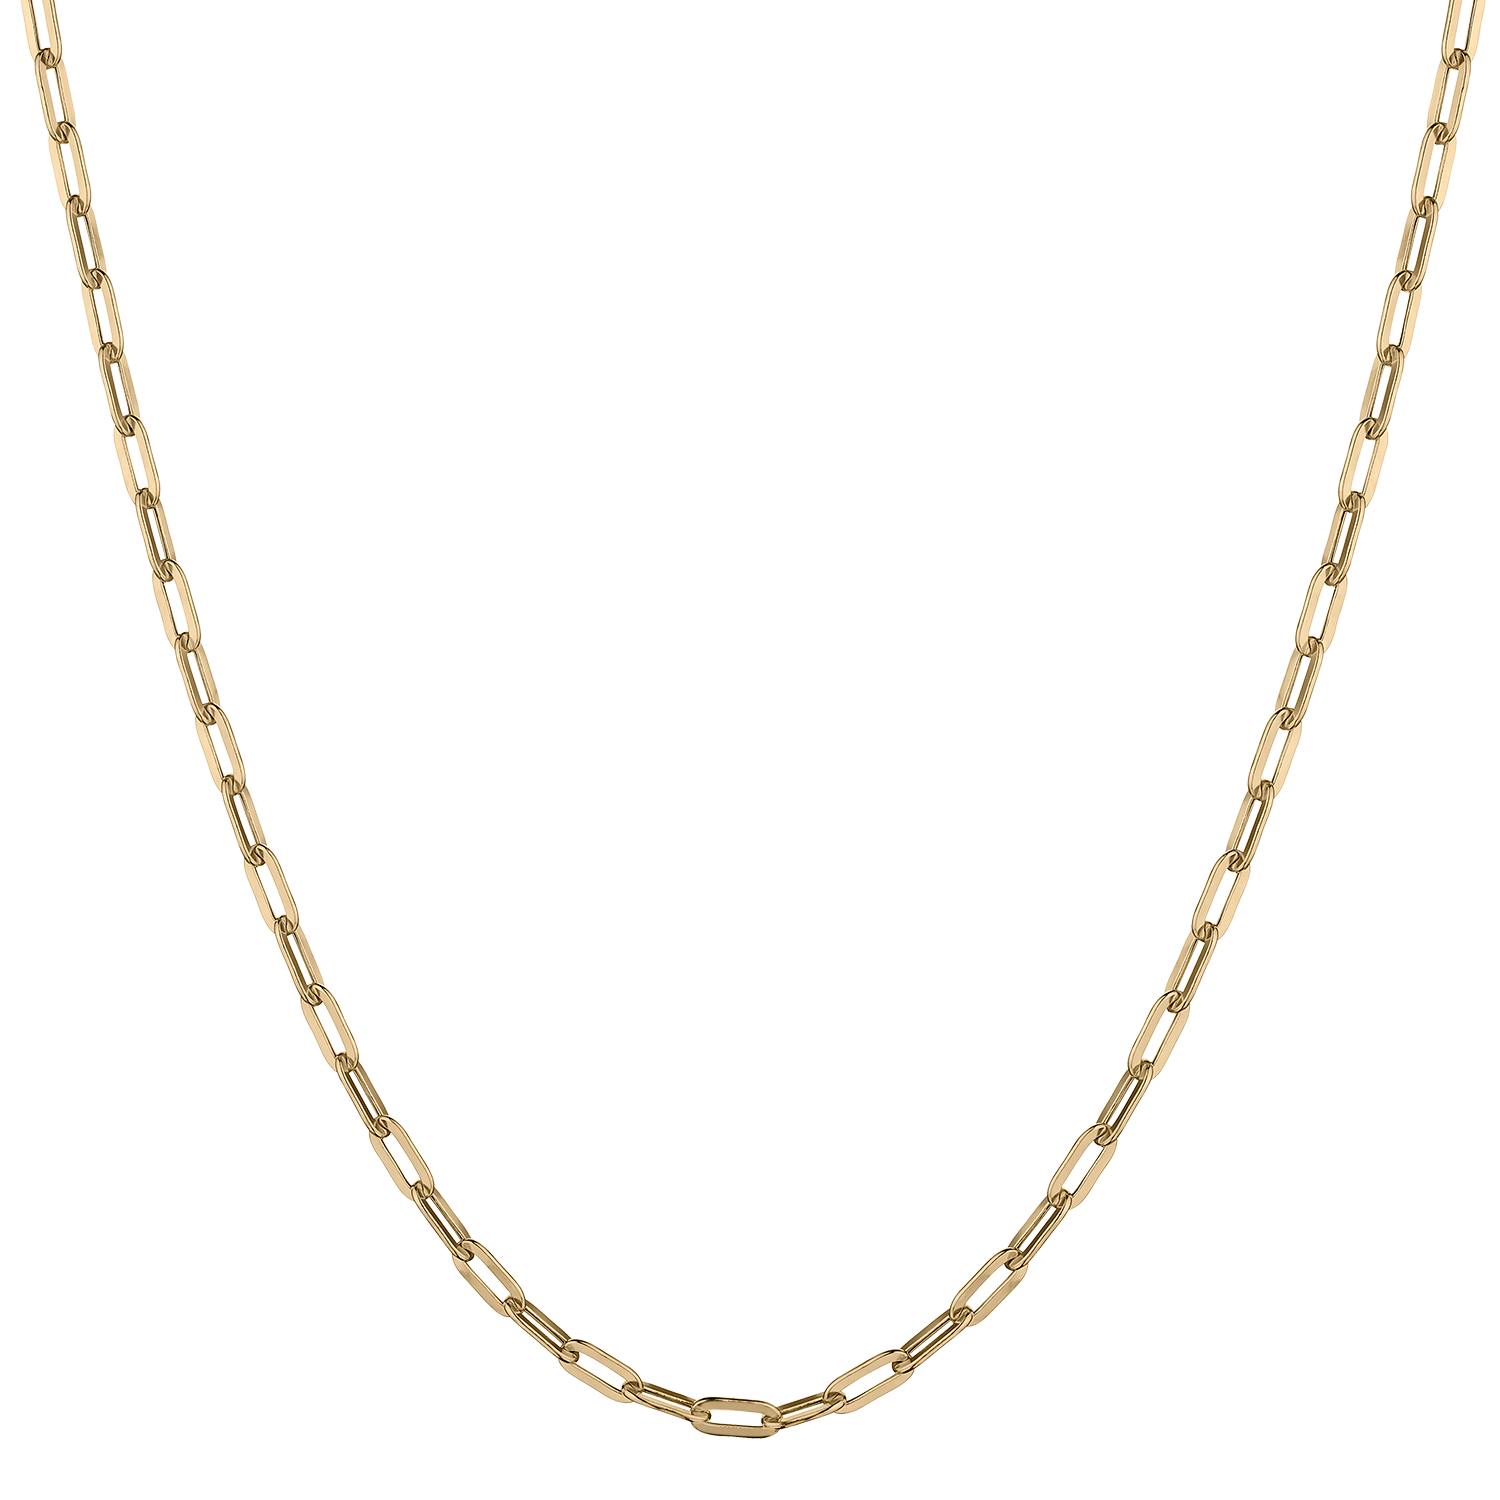 18" PAPERCHLIP CHAIN, 14kt YELLOW GOLD.................NOW